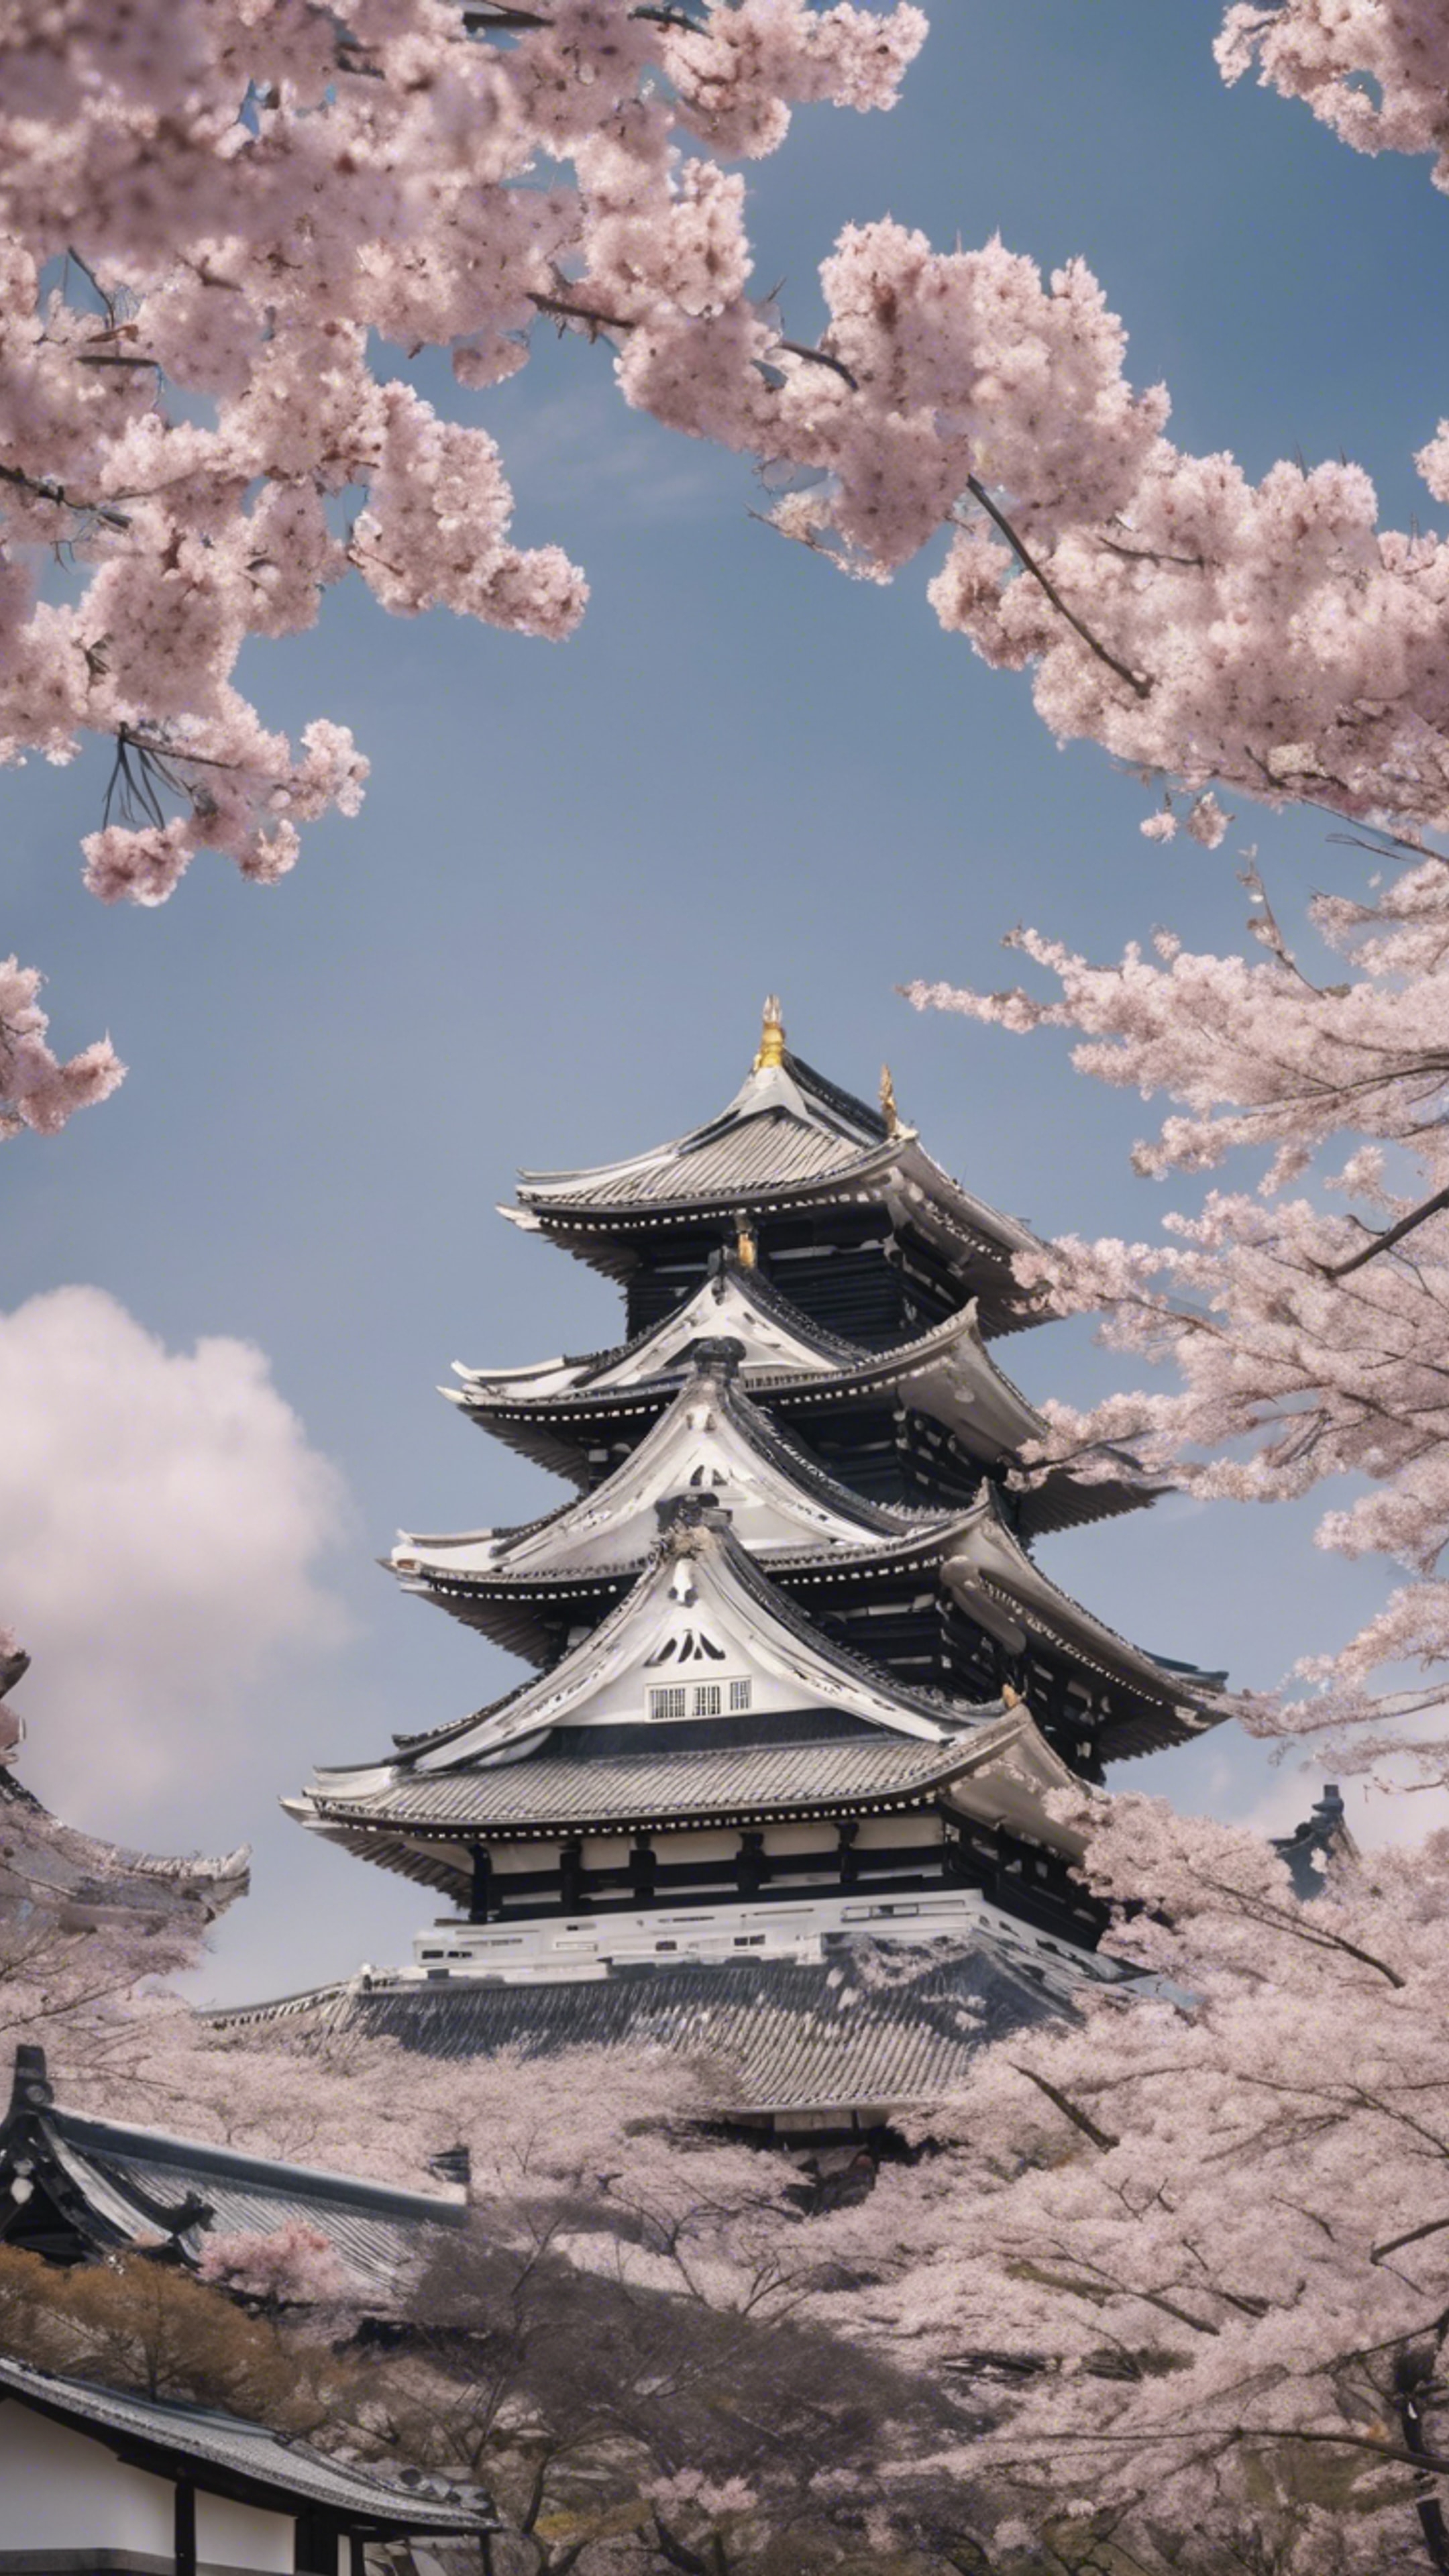 Himeji Castle during cherry blossom season, captured in a Japanese woodblock print style.壁紙[c2e2e8f3672d4d1cb4aa]